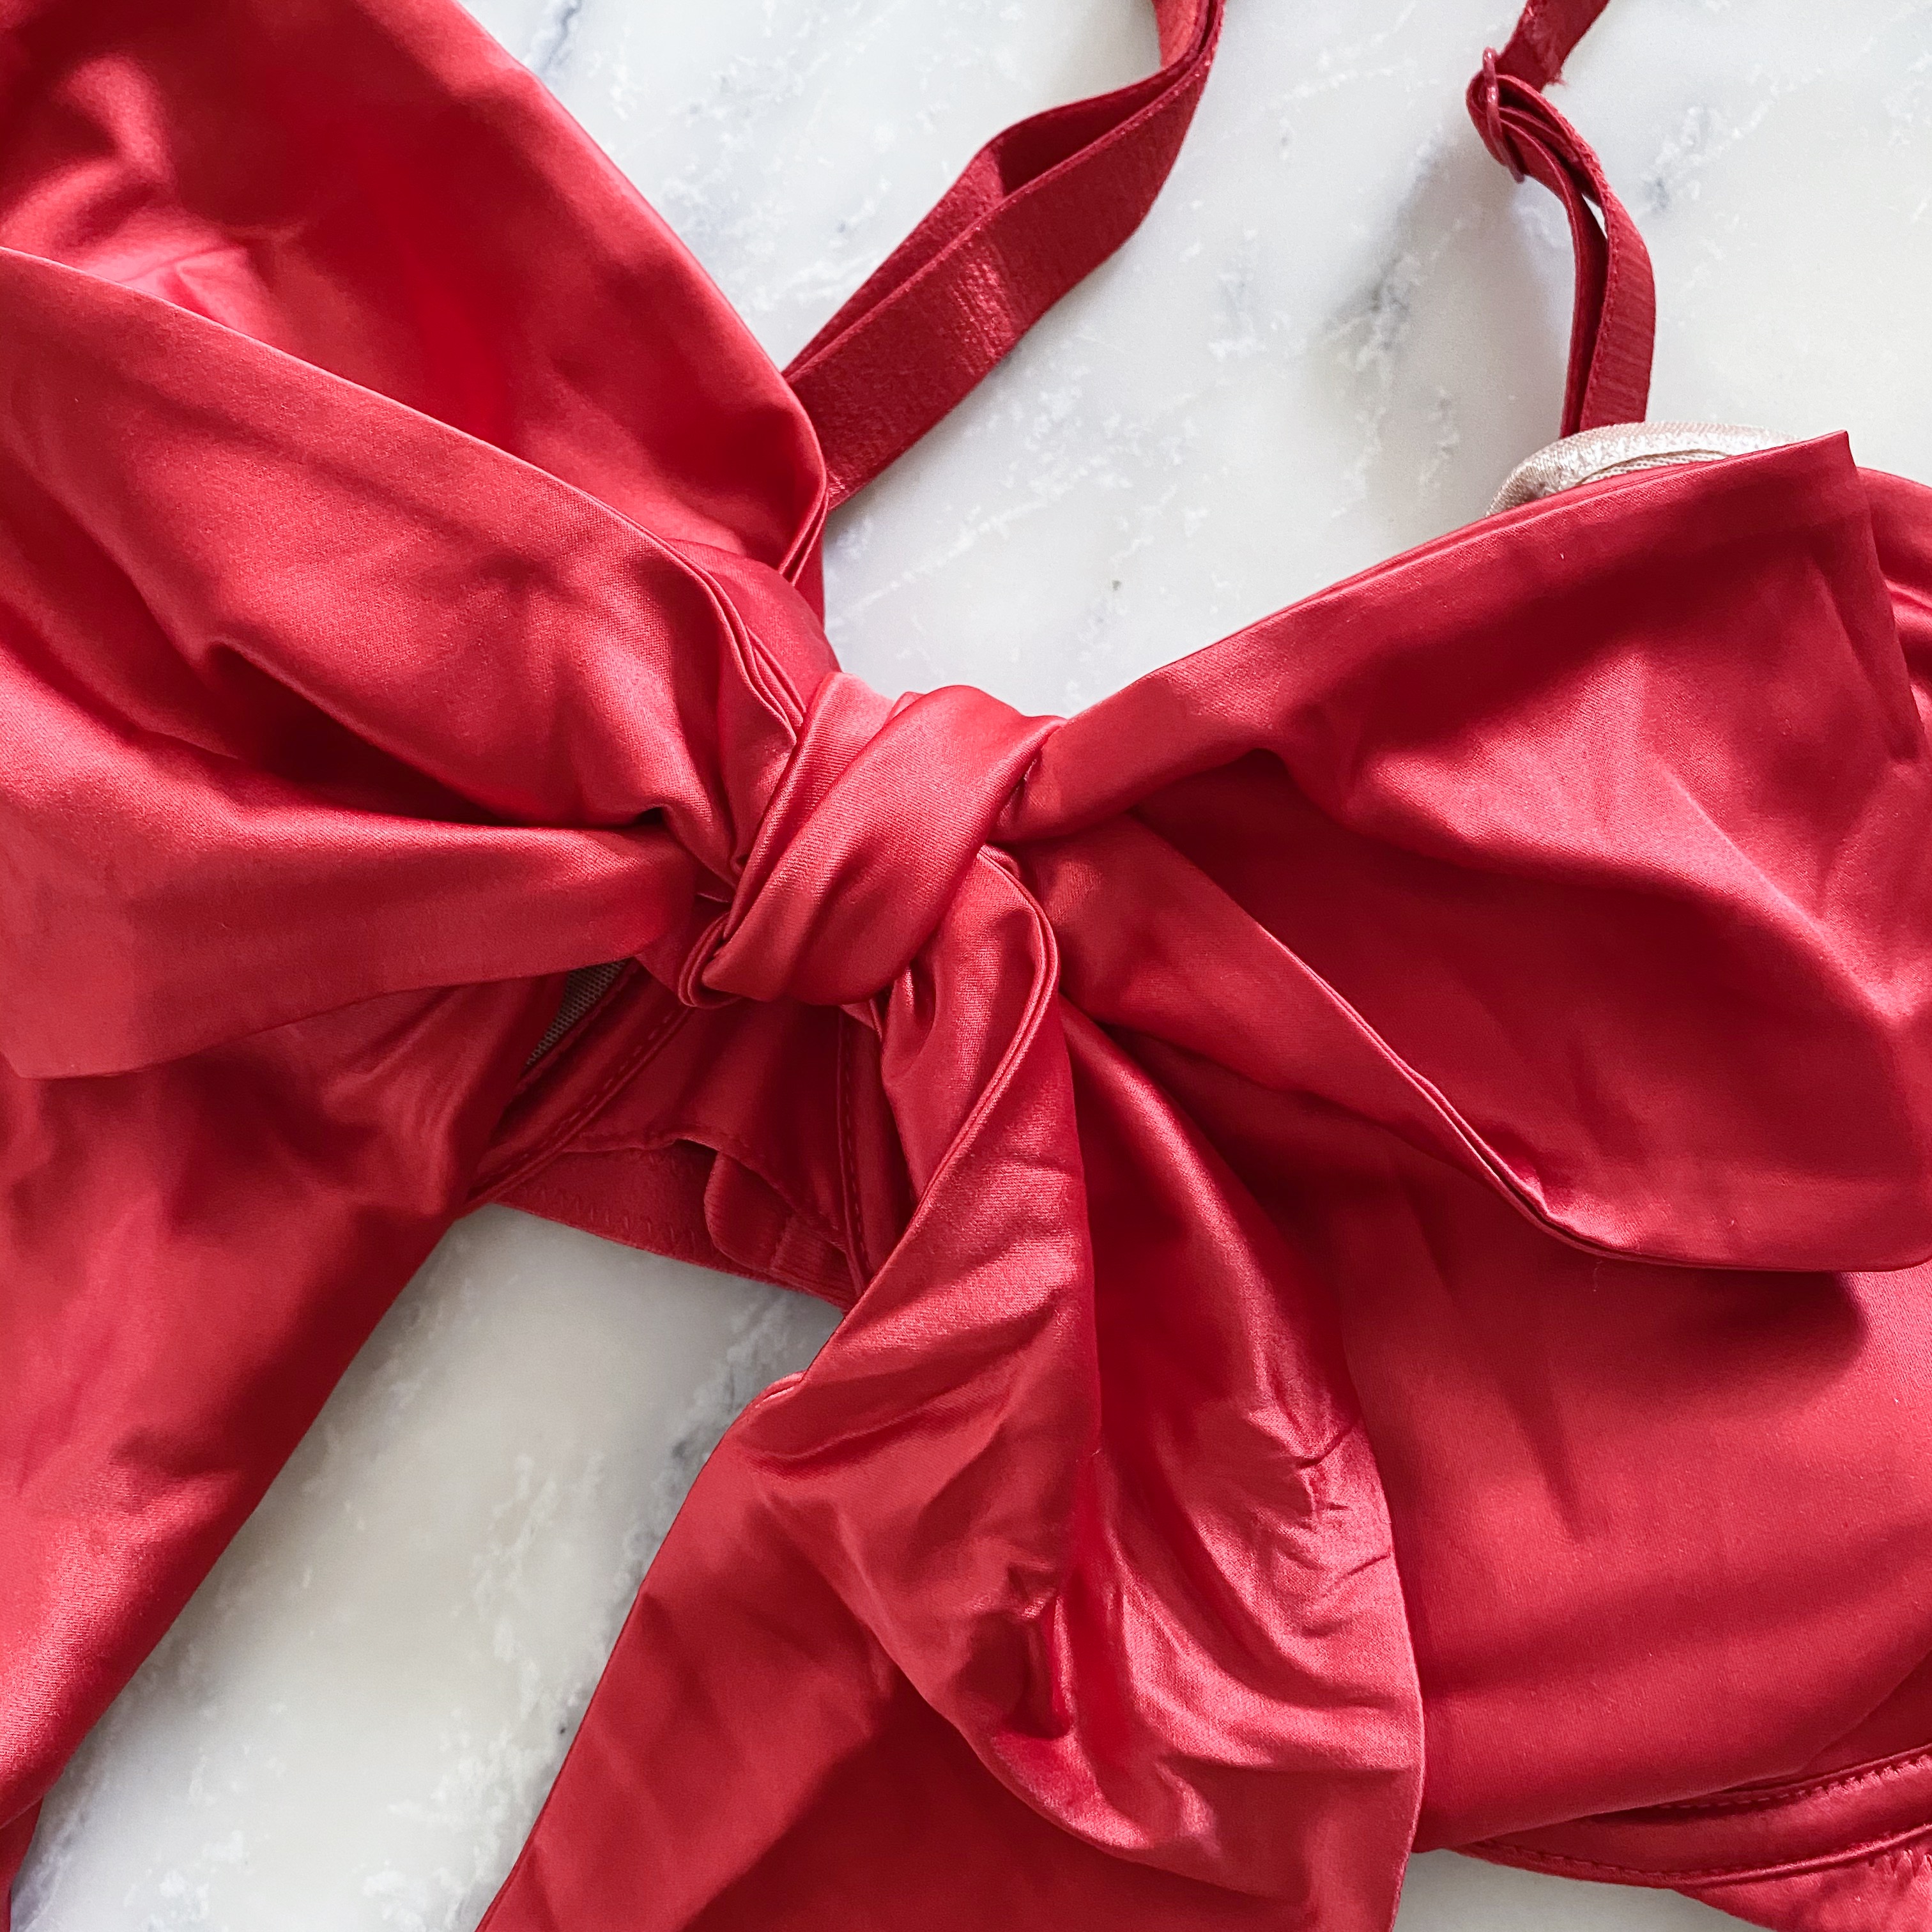 Adore Me - She's ARRIVED! Gynger makes a red-hot statement with an  over-the-top bow that's ready to get wrapped up in it all. 🎀  #SharetheAMLove